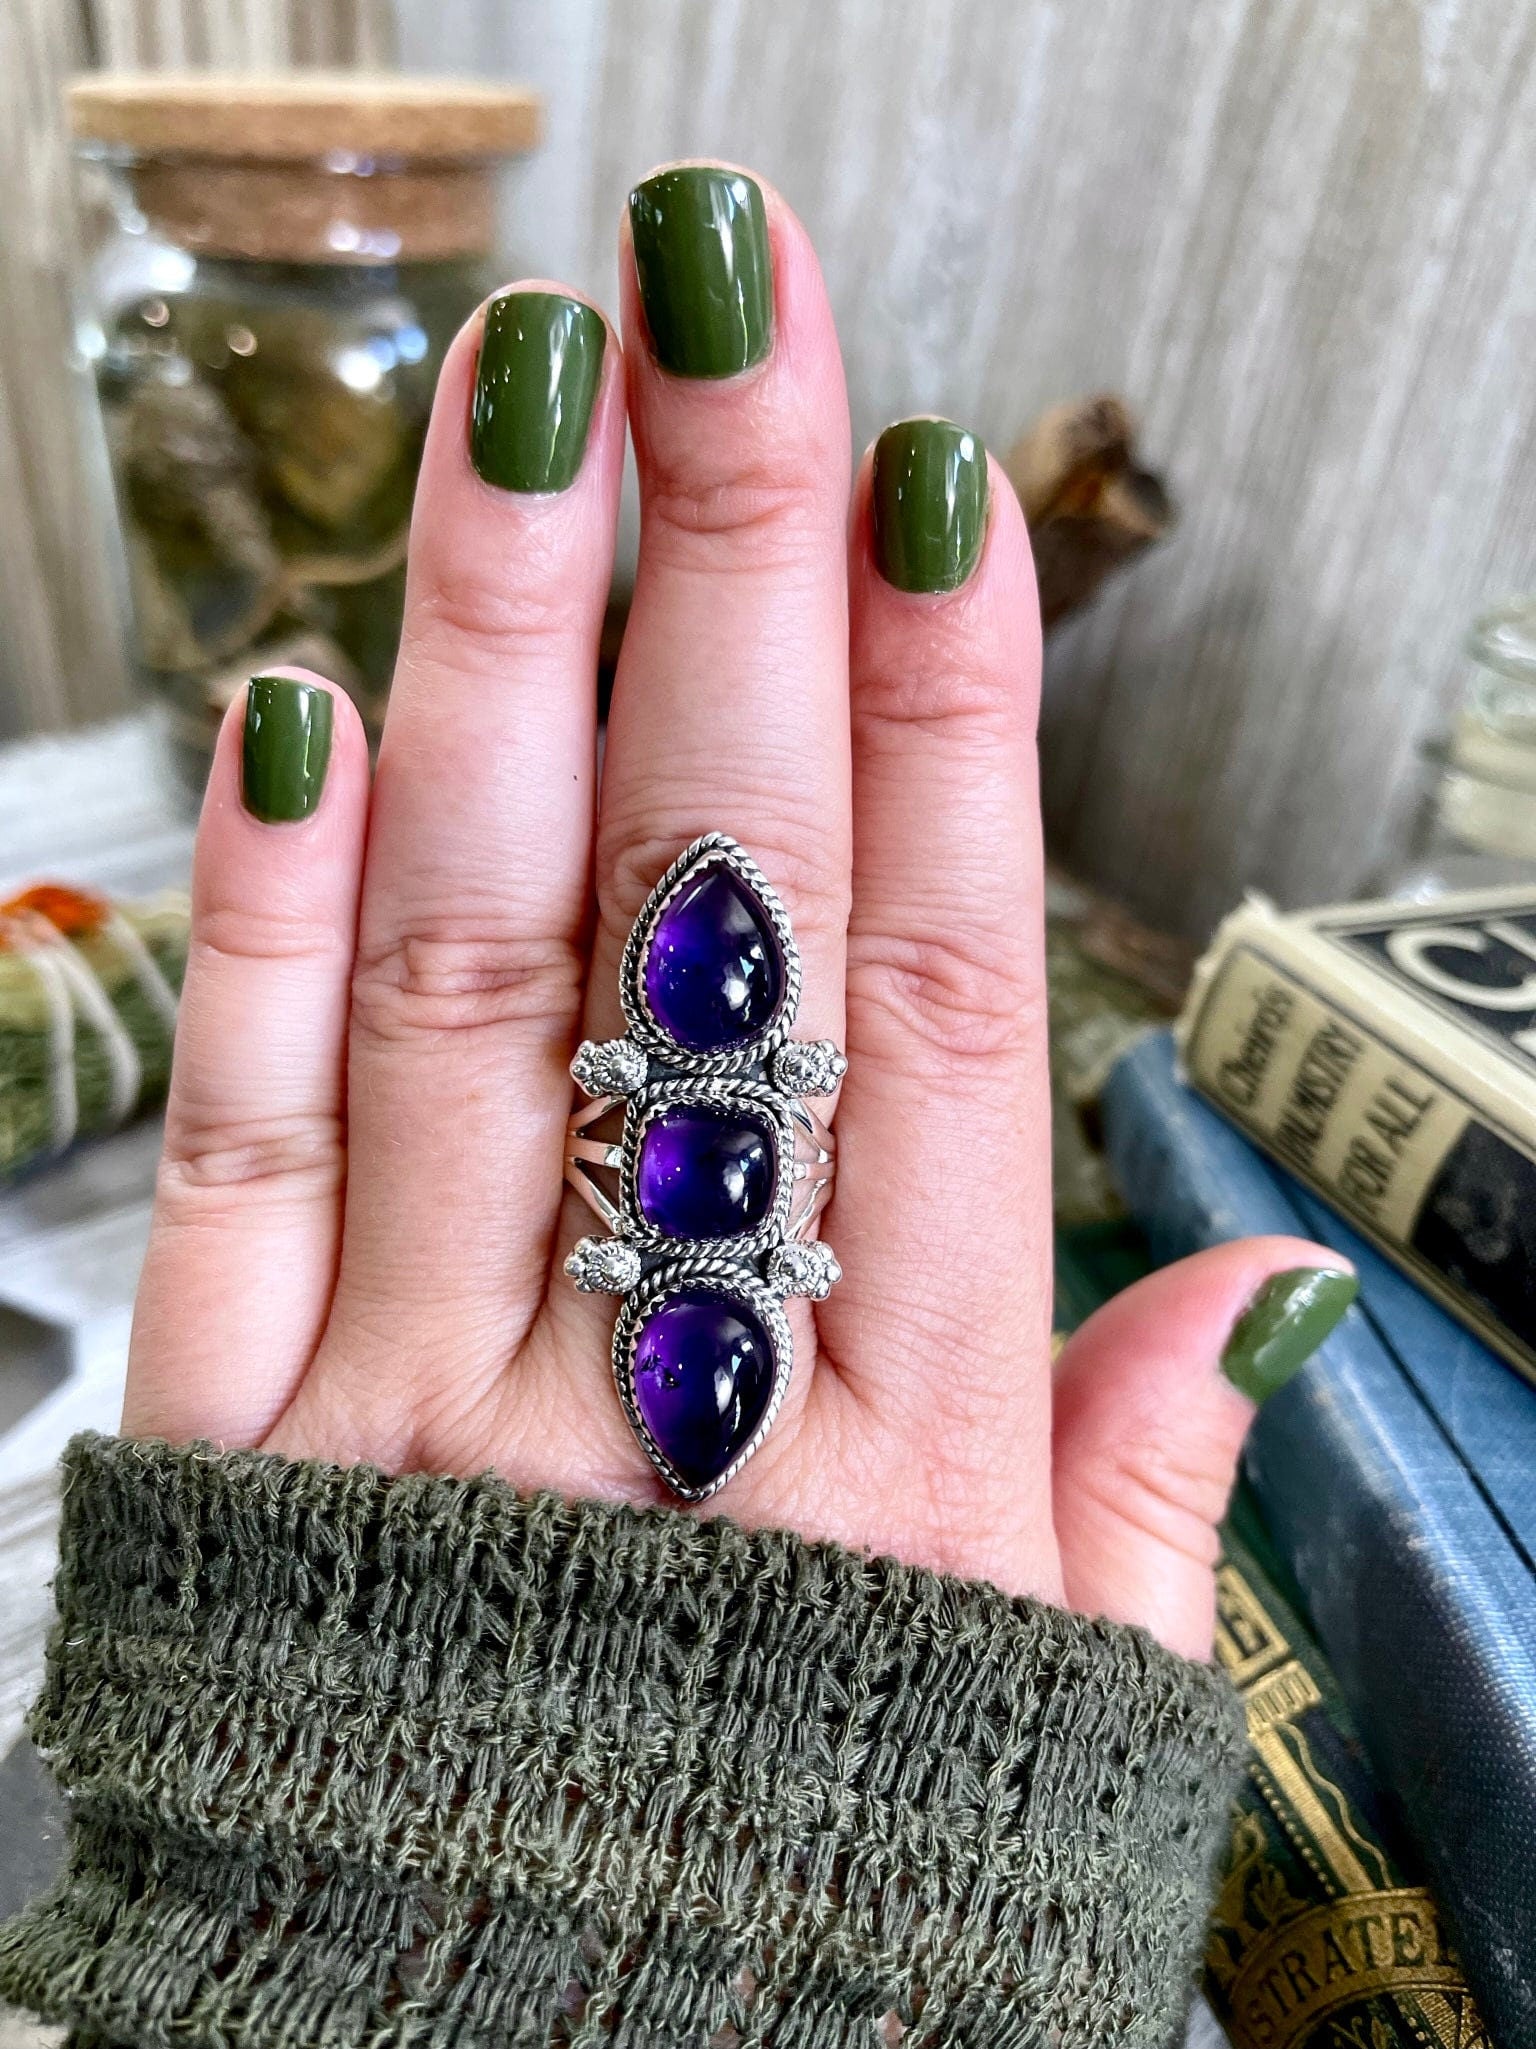 Amethyst Jewelry, Amethyst Ring, Big Crystal Jewelry, Big Crystal Ring, Big Stone Ring, Bohemian Ring, Boho Jewelry, Boho Ring, Etsy Id 1185689756, Foxlark Alchemy, Foxlark- Rings, Gift For Woman, Gypsy Ring, Jewelry, Rings, Statement Rings